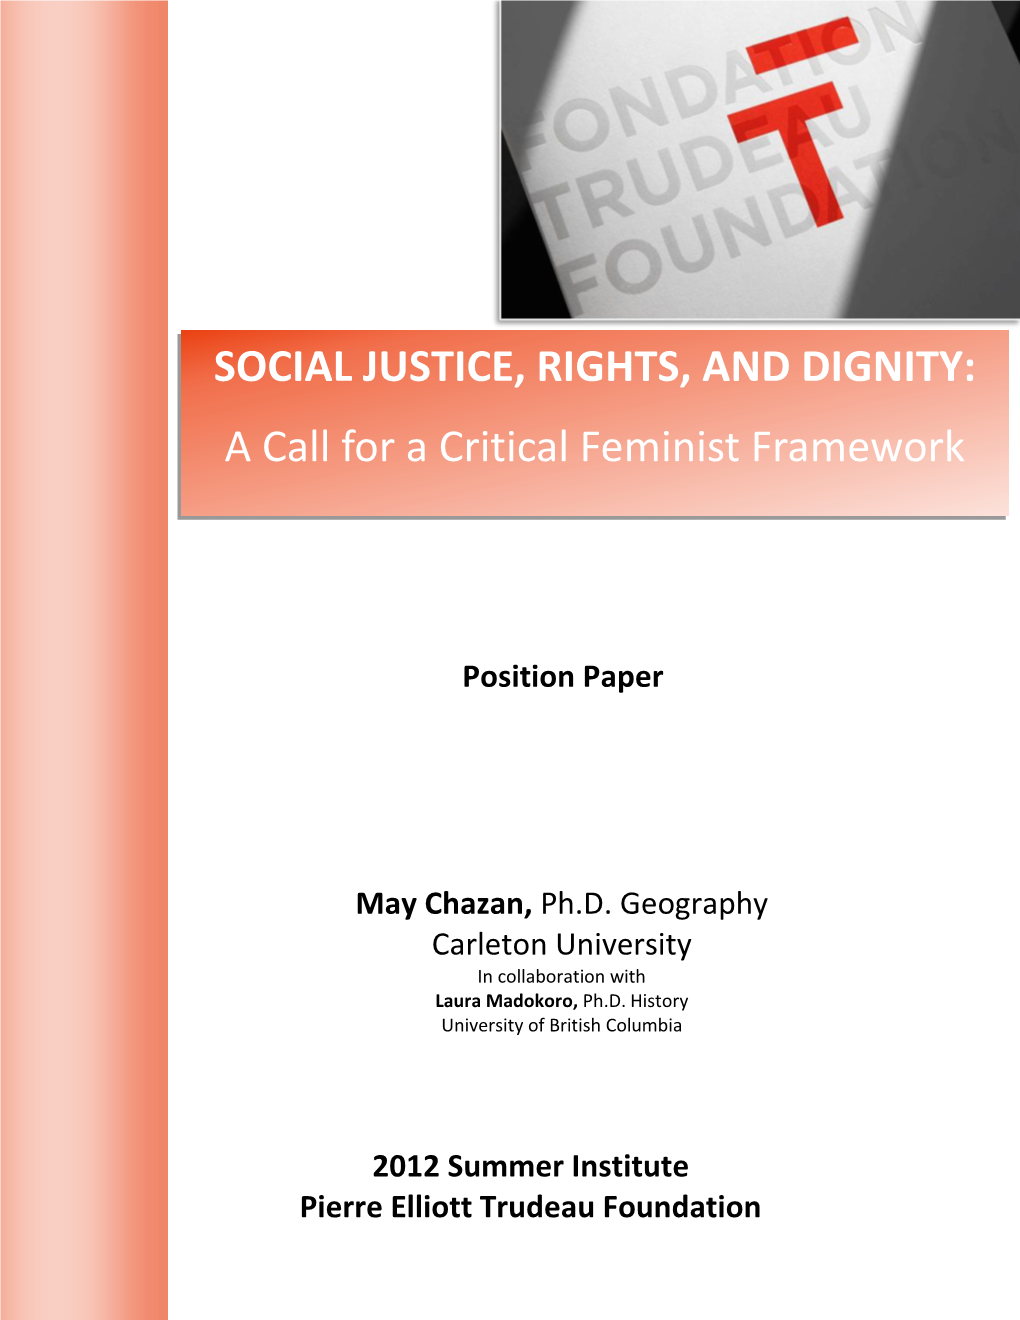 SOCIAL JUSTICE, RIGHTS, and DIGNITY: a Call for a Critical Feminist Framework